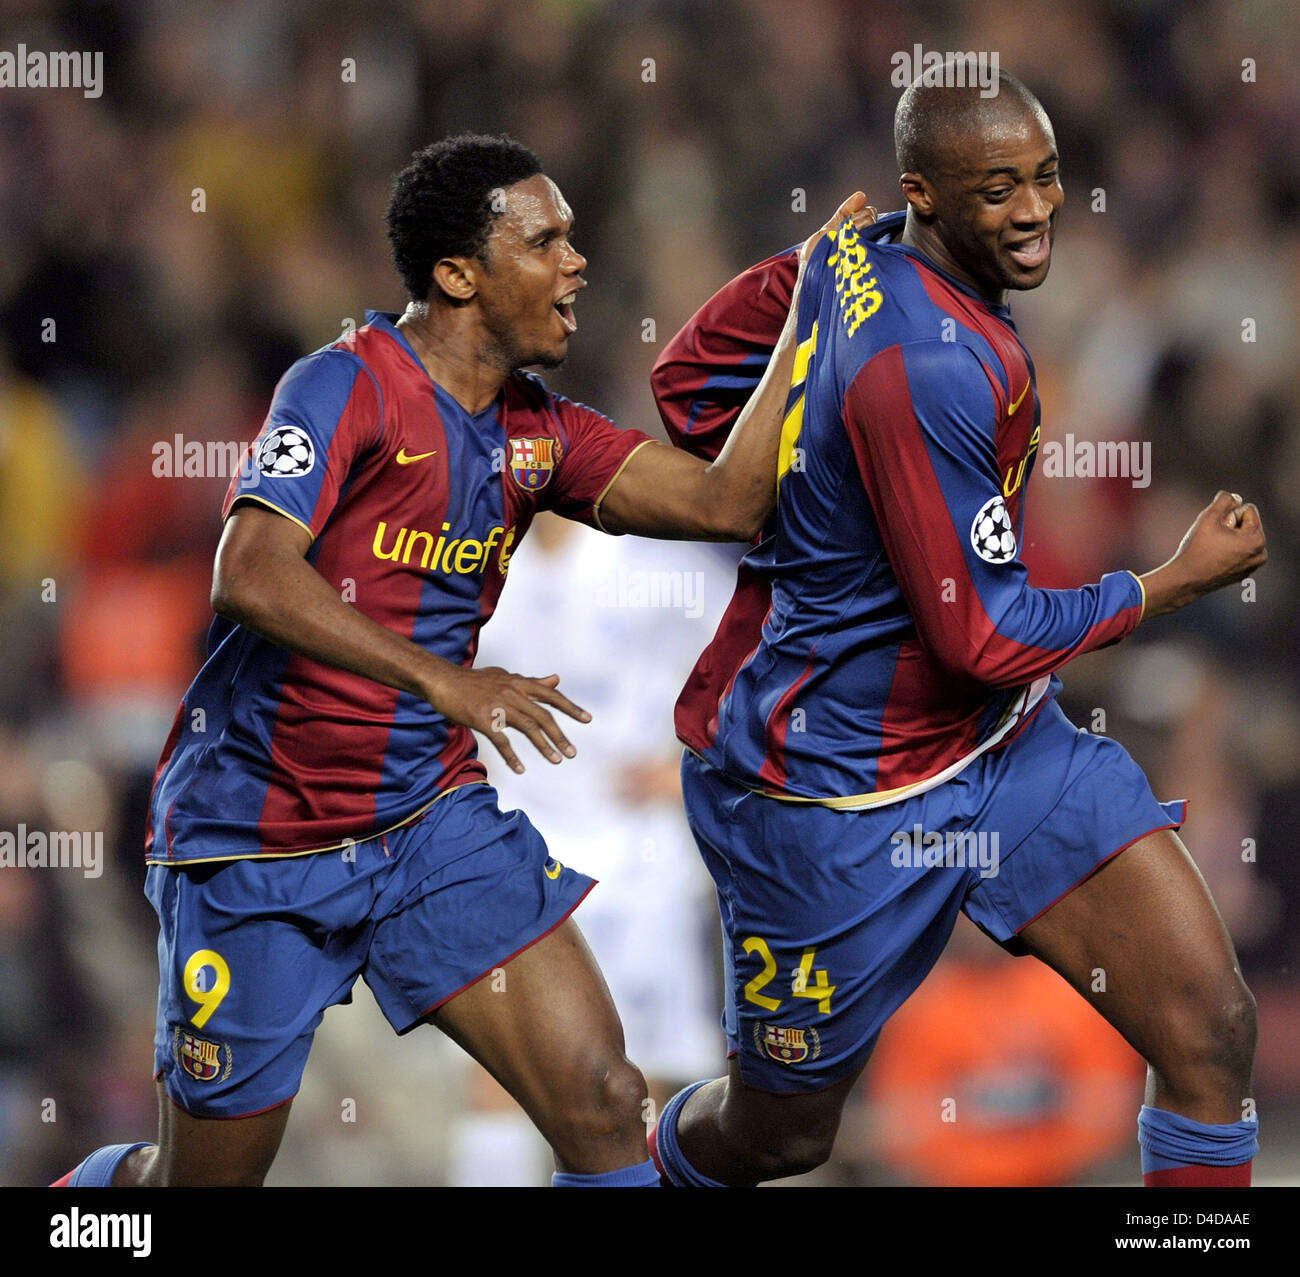 Barcelona's Yaya Toure (R) celebrates with his team-mate Samuel Eto'o (L) scoring the 1-0 poacher's in the UEFA Champions League quarter-finals match FC Barcelona v FC Schalke 04 at Camp Nuo stadium of Barcelona, Spain, 09 April 2008. A weak Spanish Primera Division side Barcelona won over German Bundesliga squad Schalke 1-0 and moves up to semi-finals with a 2-0 win on aggregate.  Stock Photo